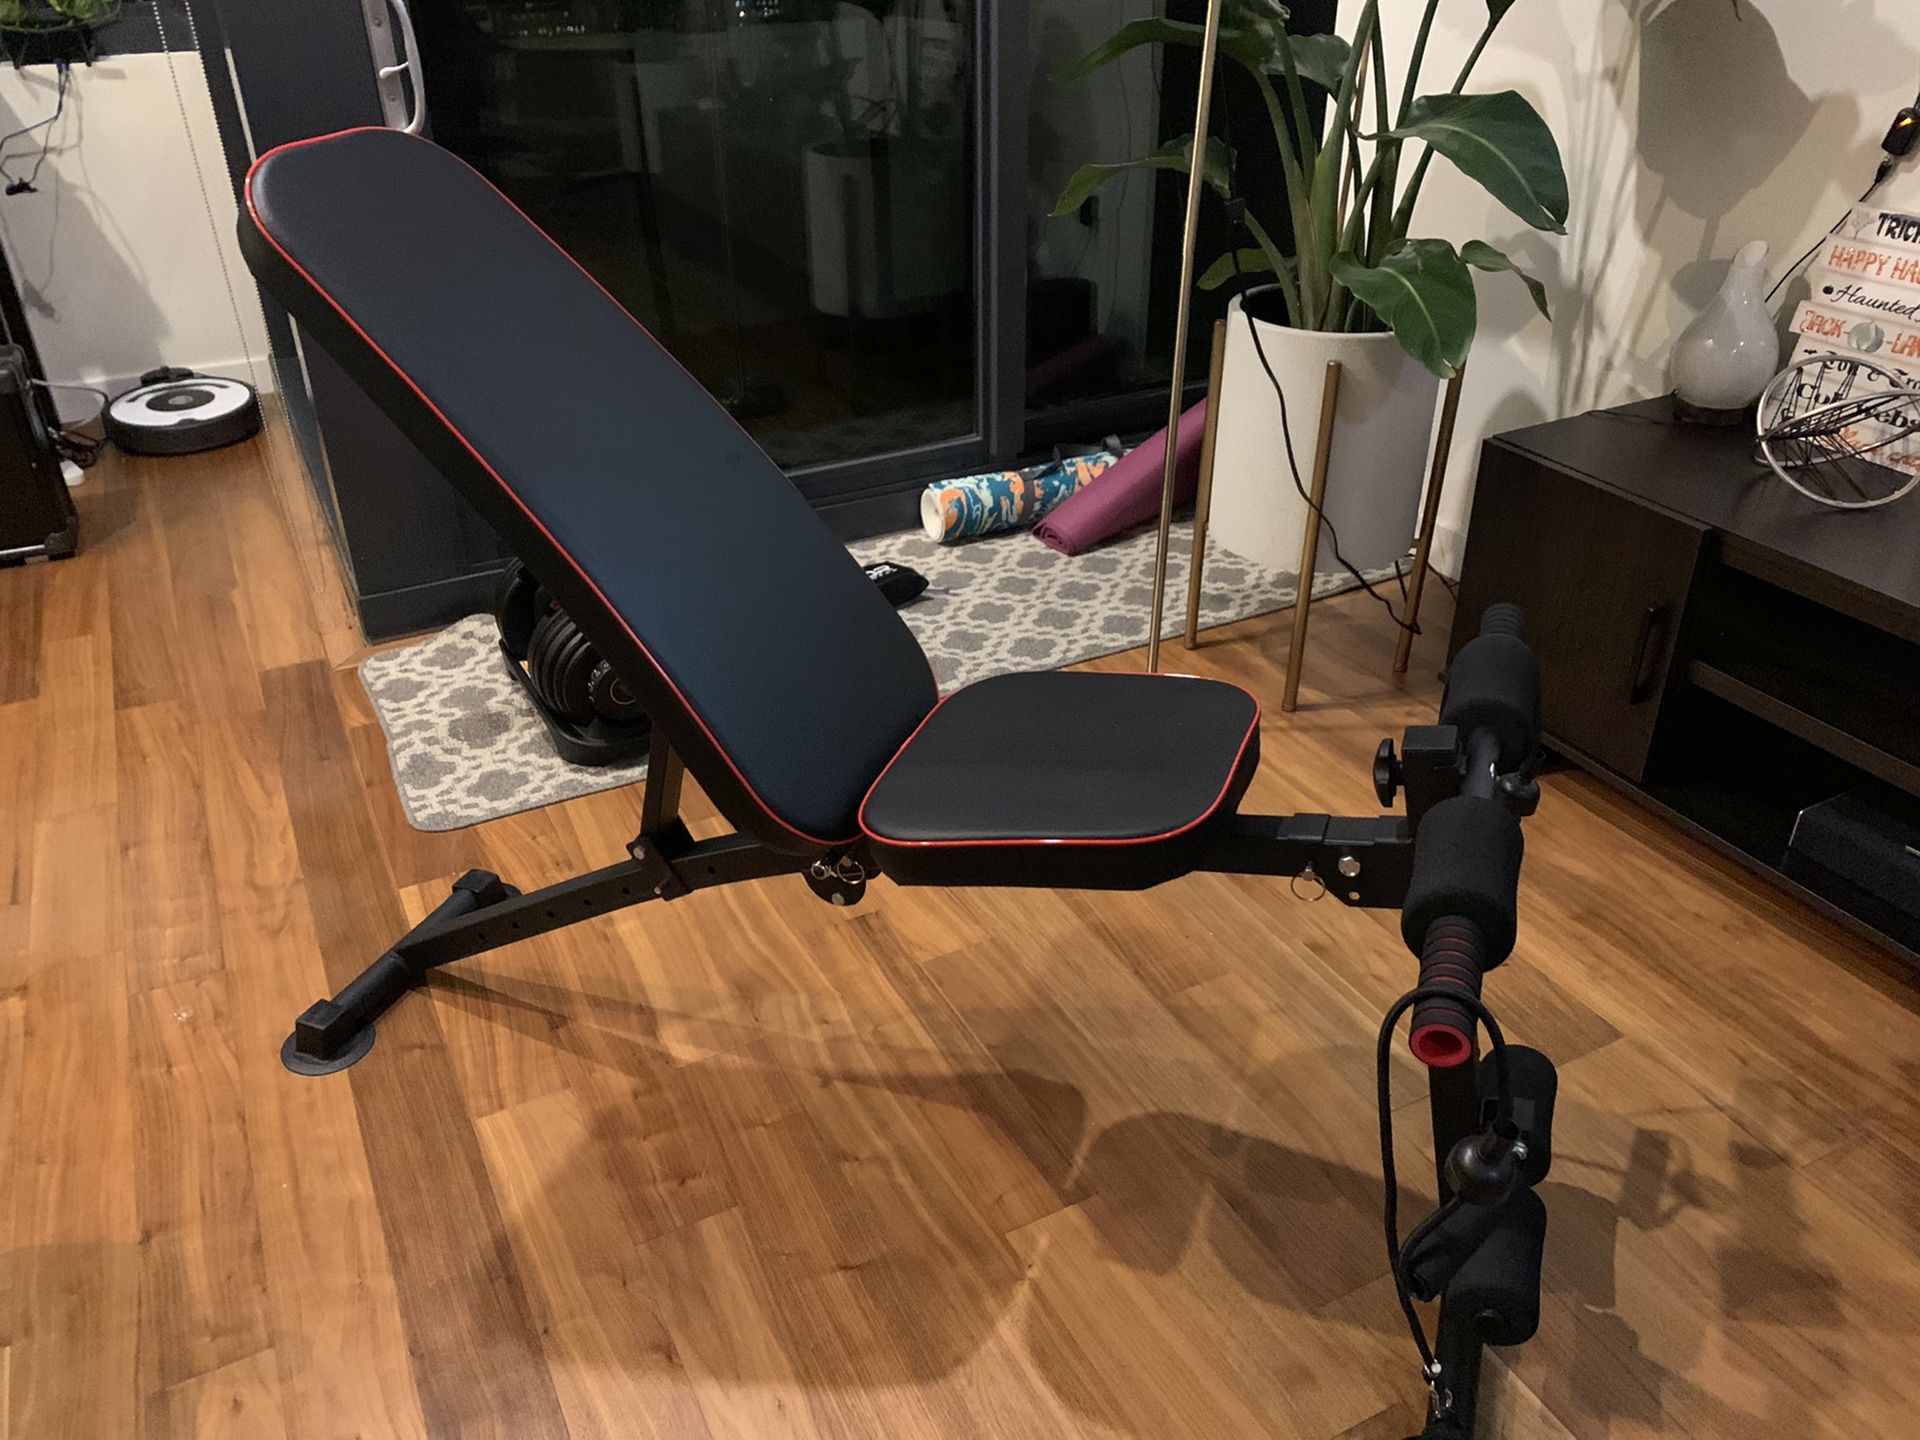 Brand new workout bench